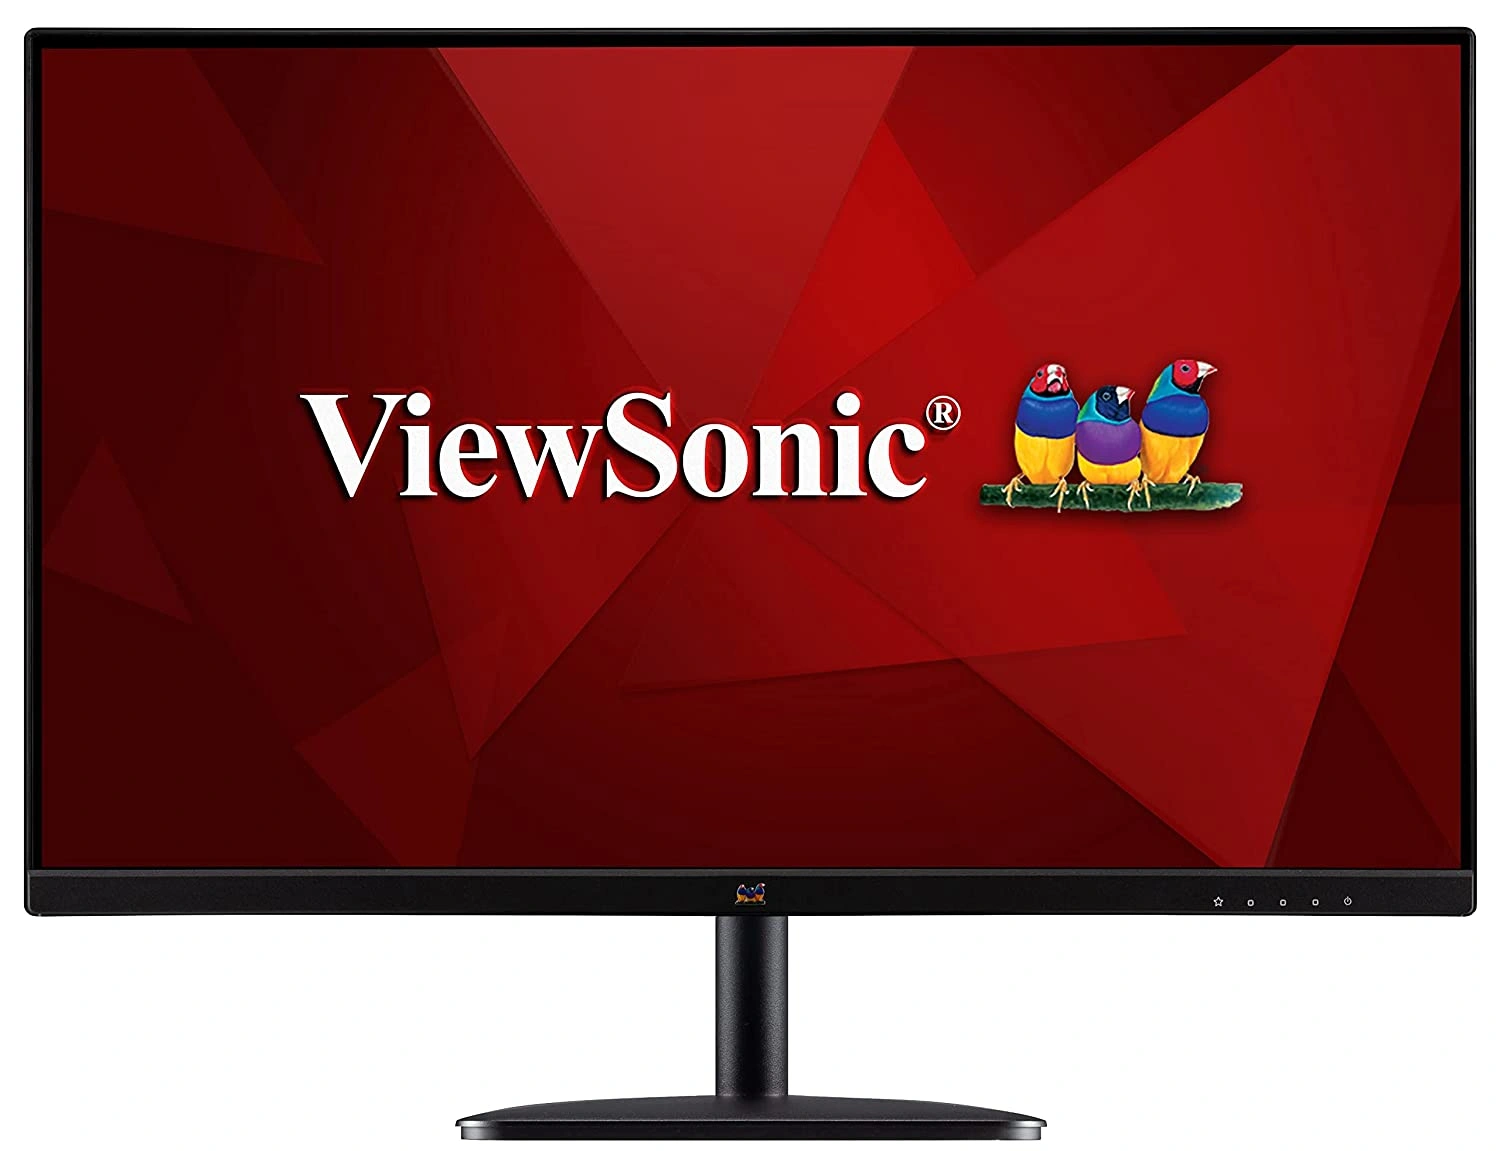 ViewSonic VA2432-MH-IN-1 (23.8 inch) IPS Panel, Full HD Display, SuperClear IPS Technology, 75 Hz Refresh Rate, 3 Side Borderless Design, Dual Integrated Speakers, HDMI | VGA Enabled | Display Port, Black-2432